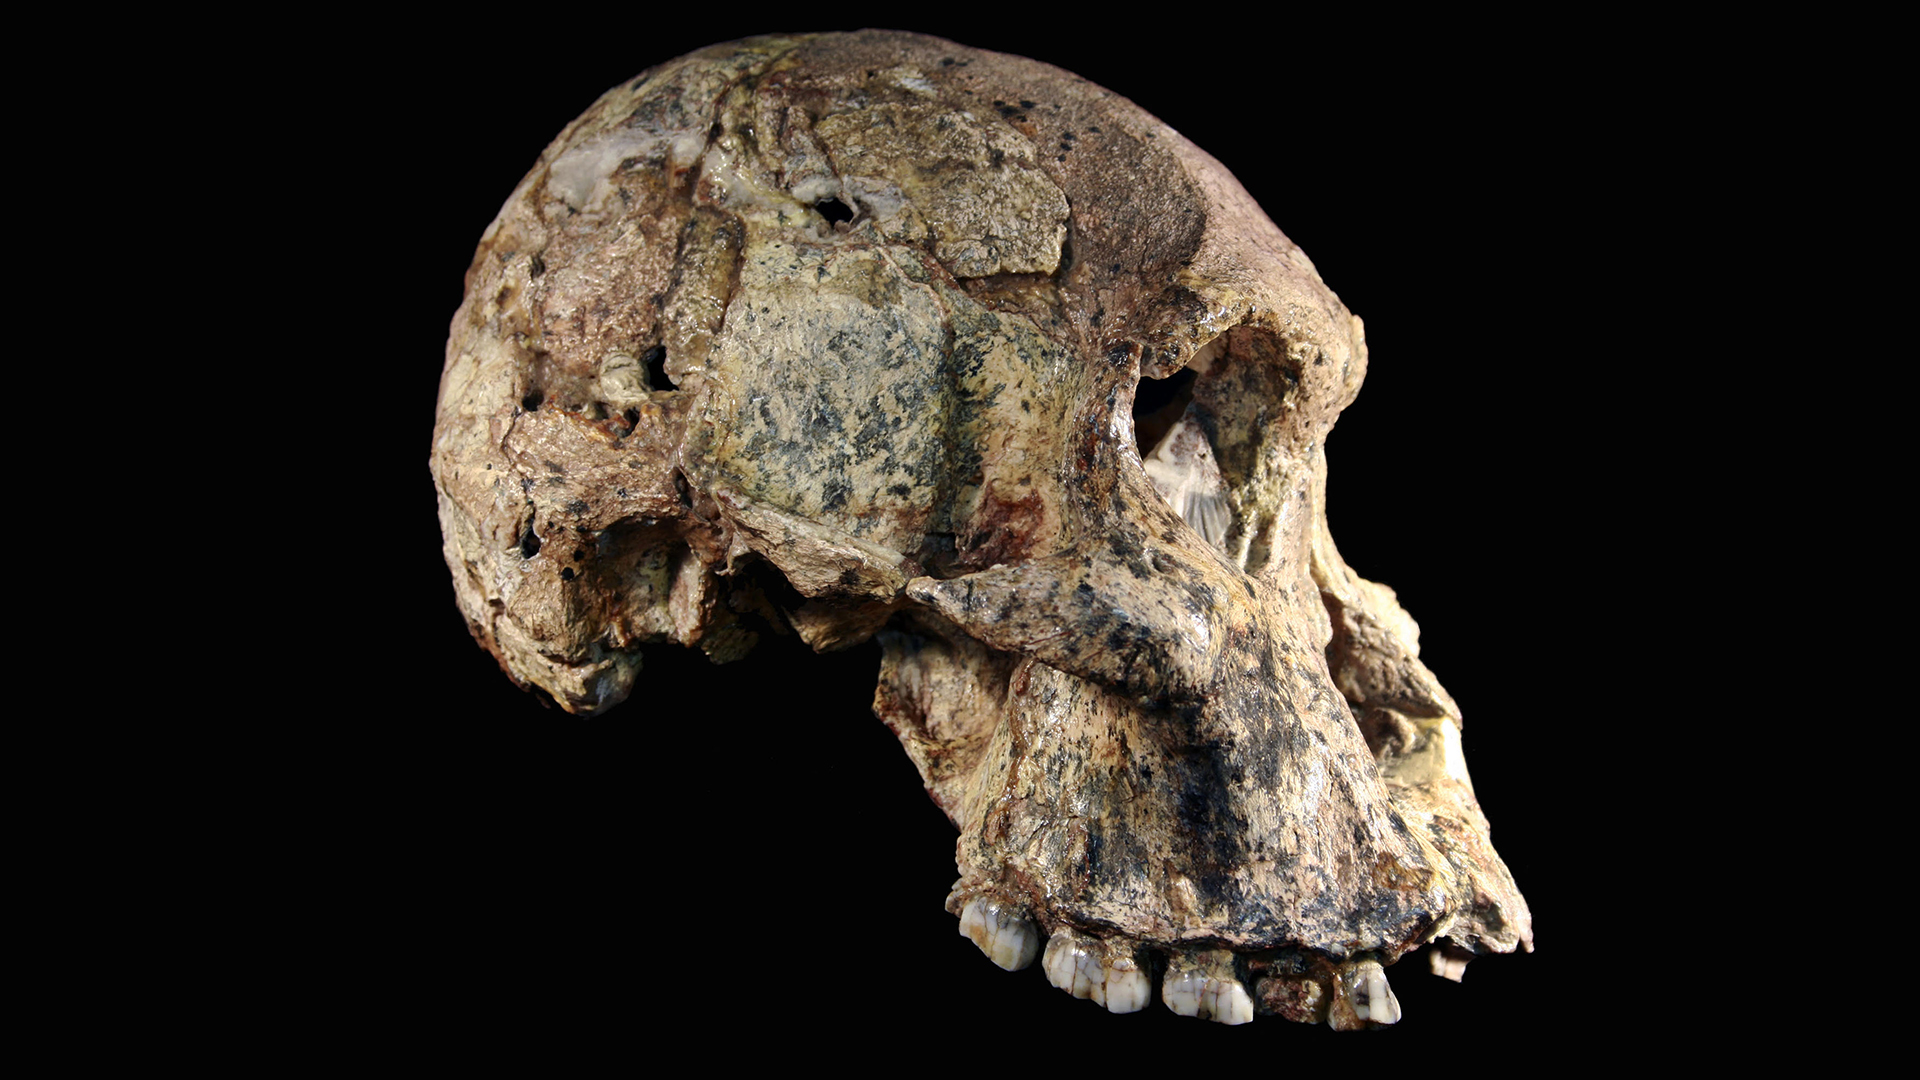 Female Australopithecus Sts 71, discovered in 1947 from Member 4 at Sterkfontein, South Africa and newly dated to 3.4 million to 3.6 million years.